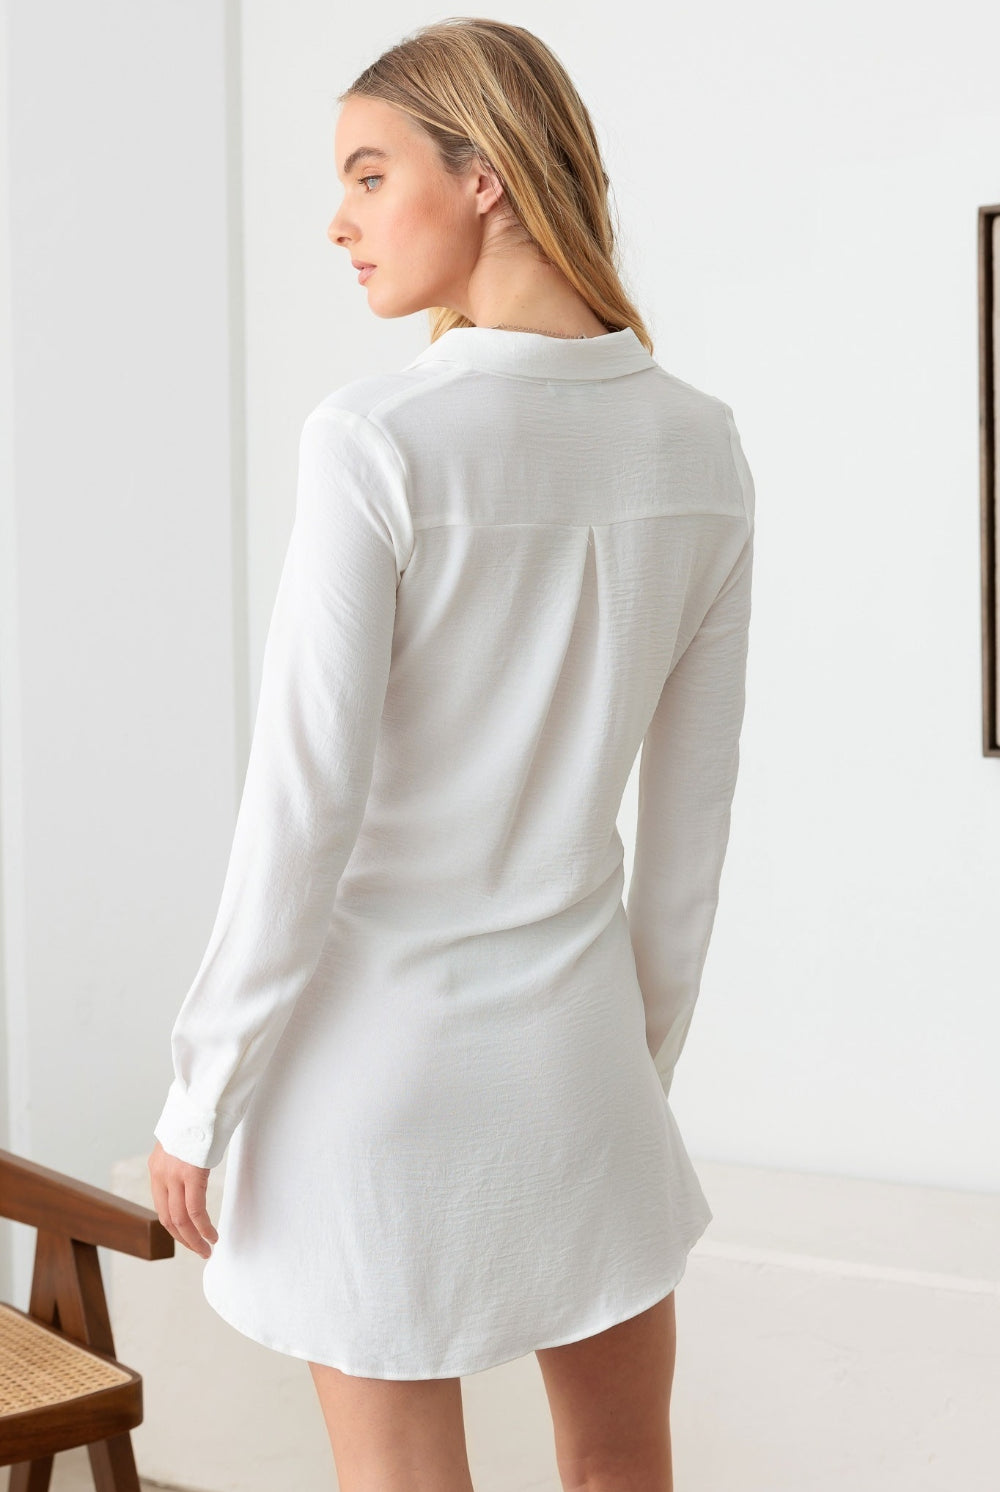 Elegant white mini dress with long sleeves and a tie waist detail, perfect for any occasion.